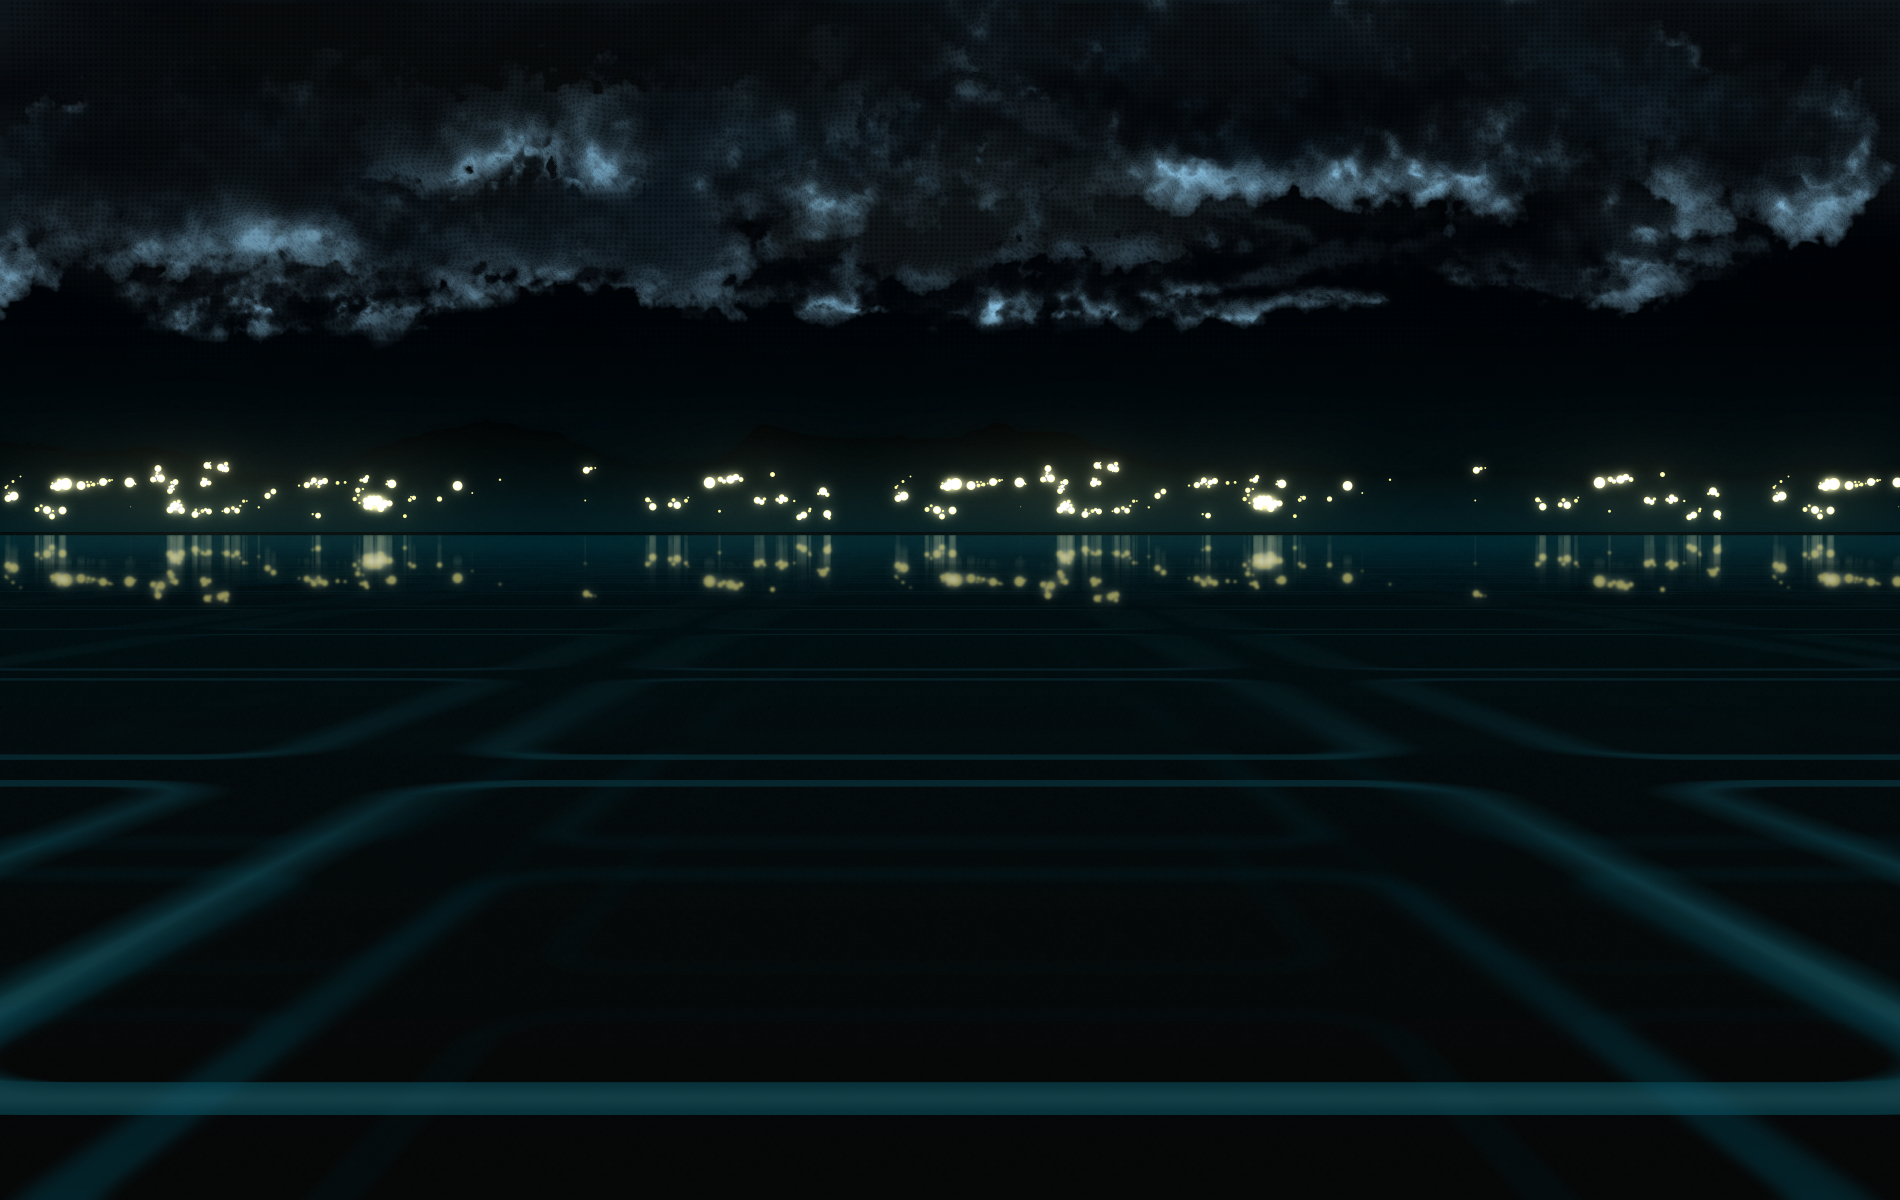 TRON Legacy Wallpaper and Background 1900x1200 ID629674